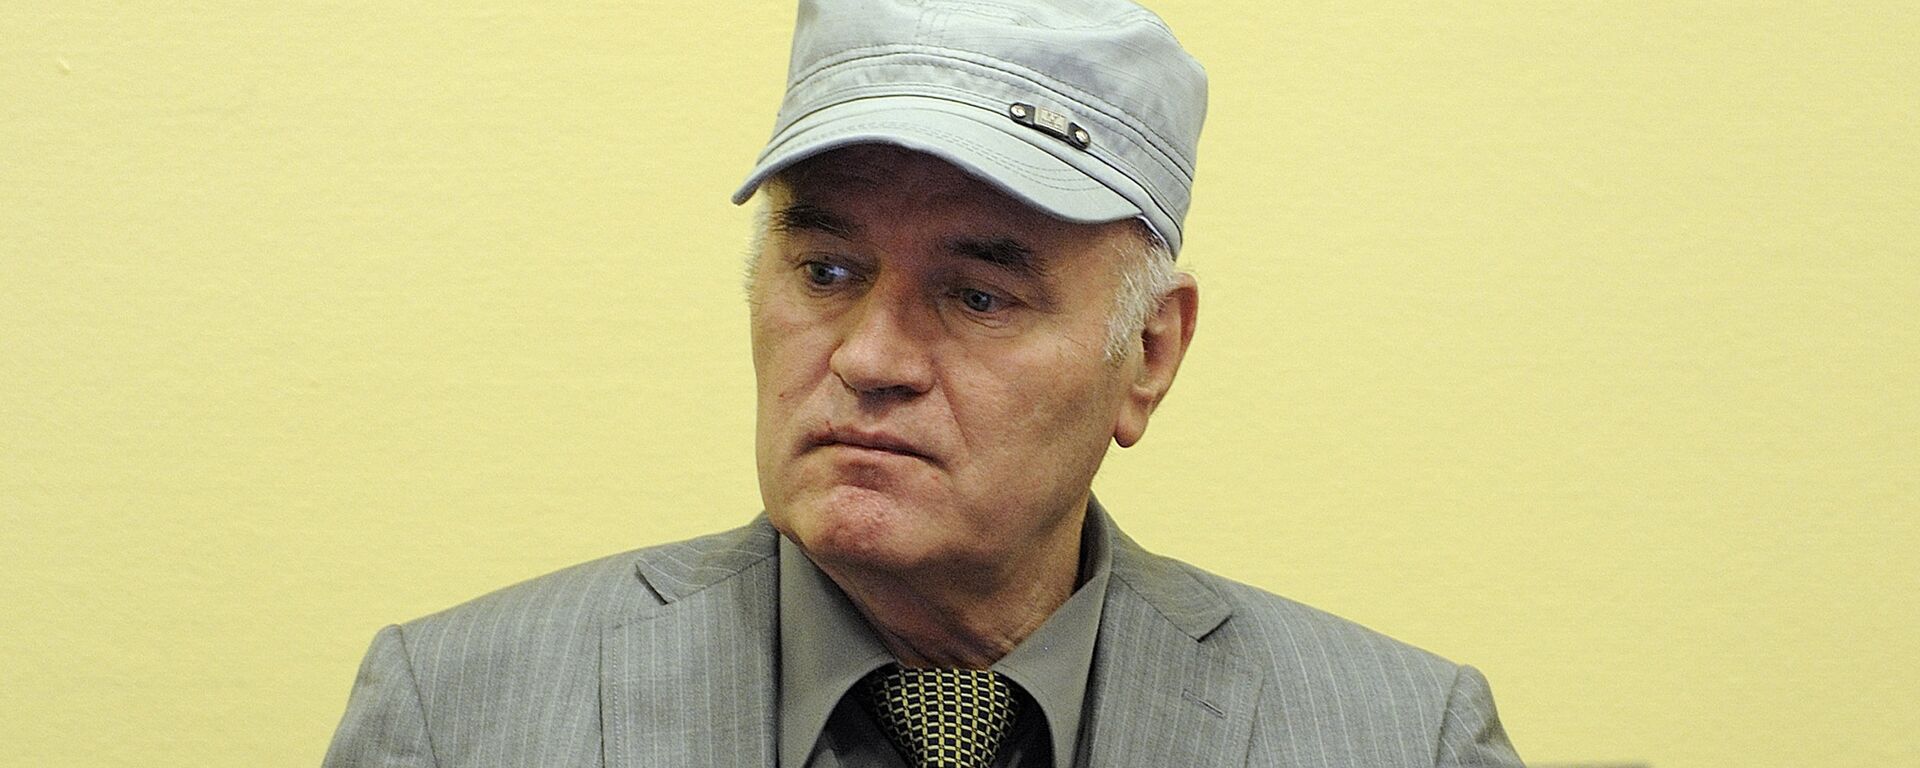 Wartime Bosnian Serb army chief Ratko Mladic sits in the court during his initial appearance at UN war crimes tribunal in The Hague - Sputnik Mundo, 1920, 08.06.2021